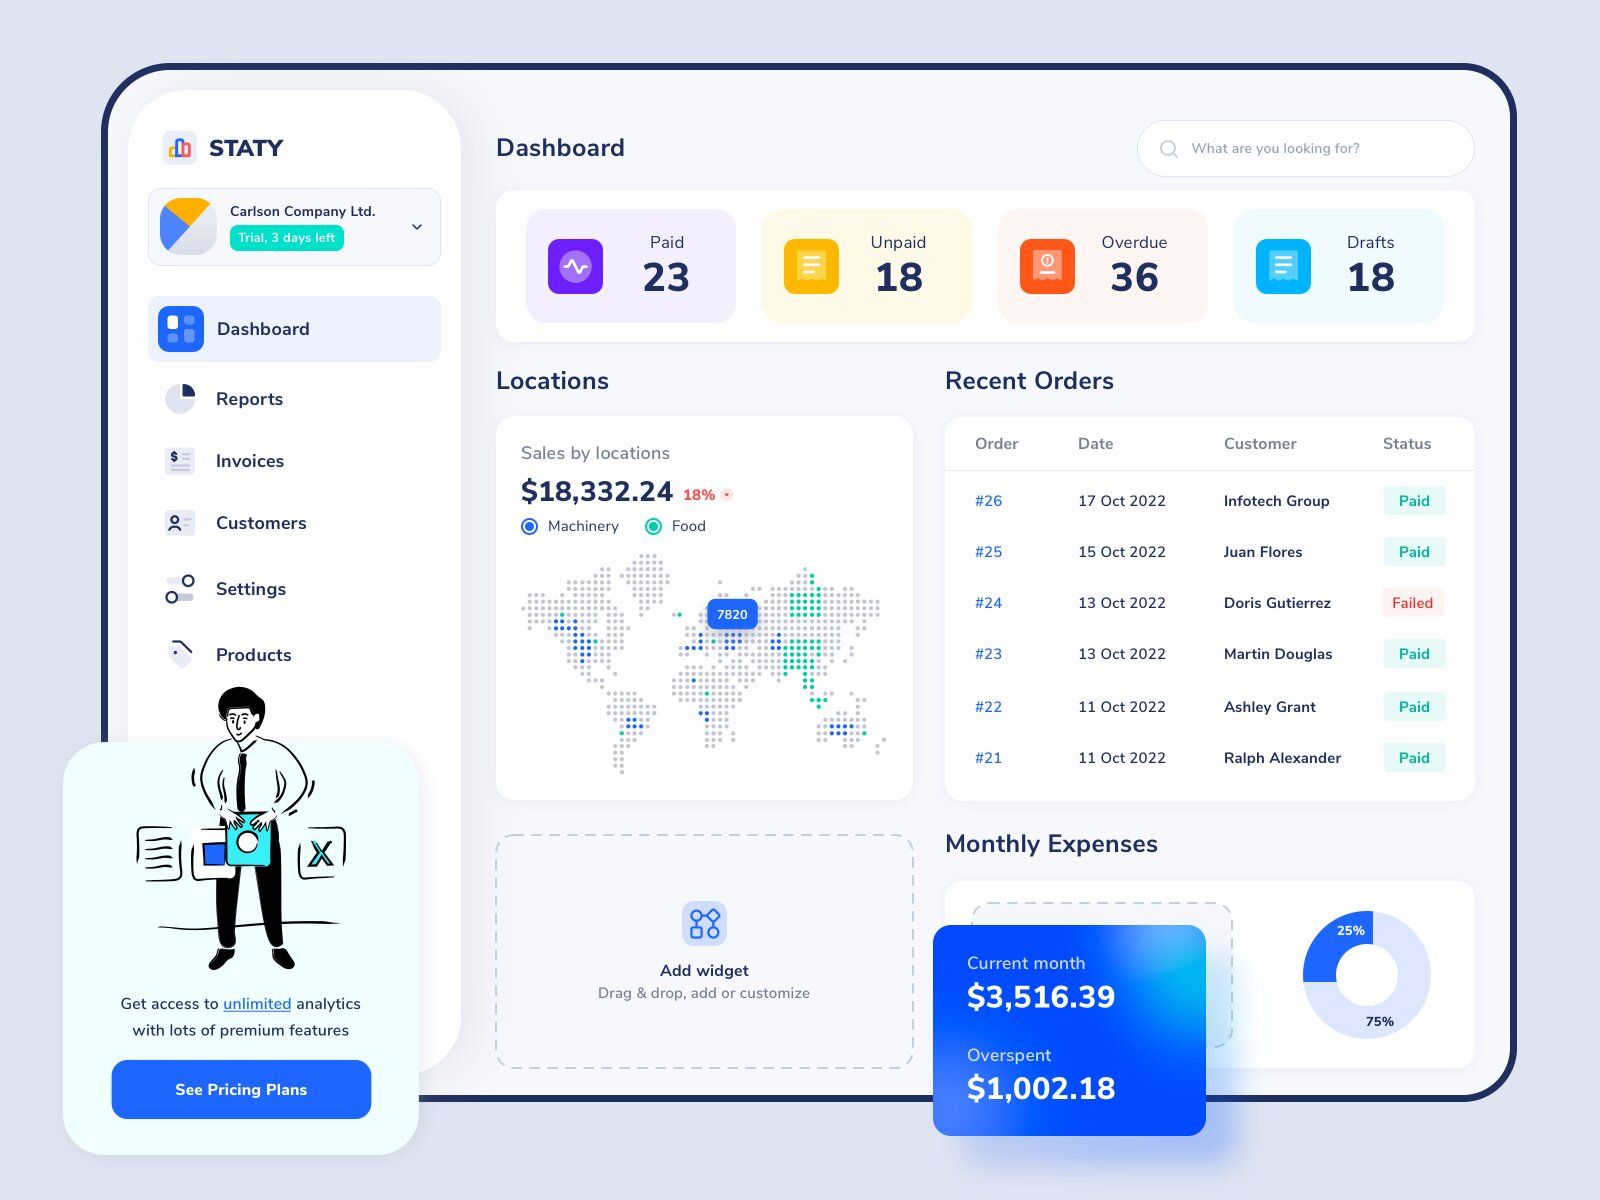 When using custom software developers services, you can integrate multiple 3rd-party programs during your tax software developement (*image by [Emy Lascan](https://dribbble.com/mazepixel){ rel="nofollow" target="_blank" .default-md}*)